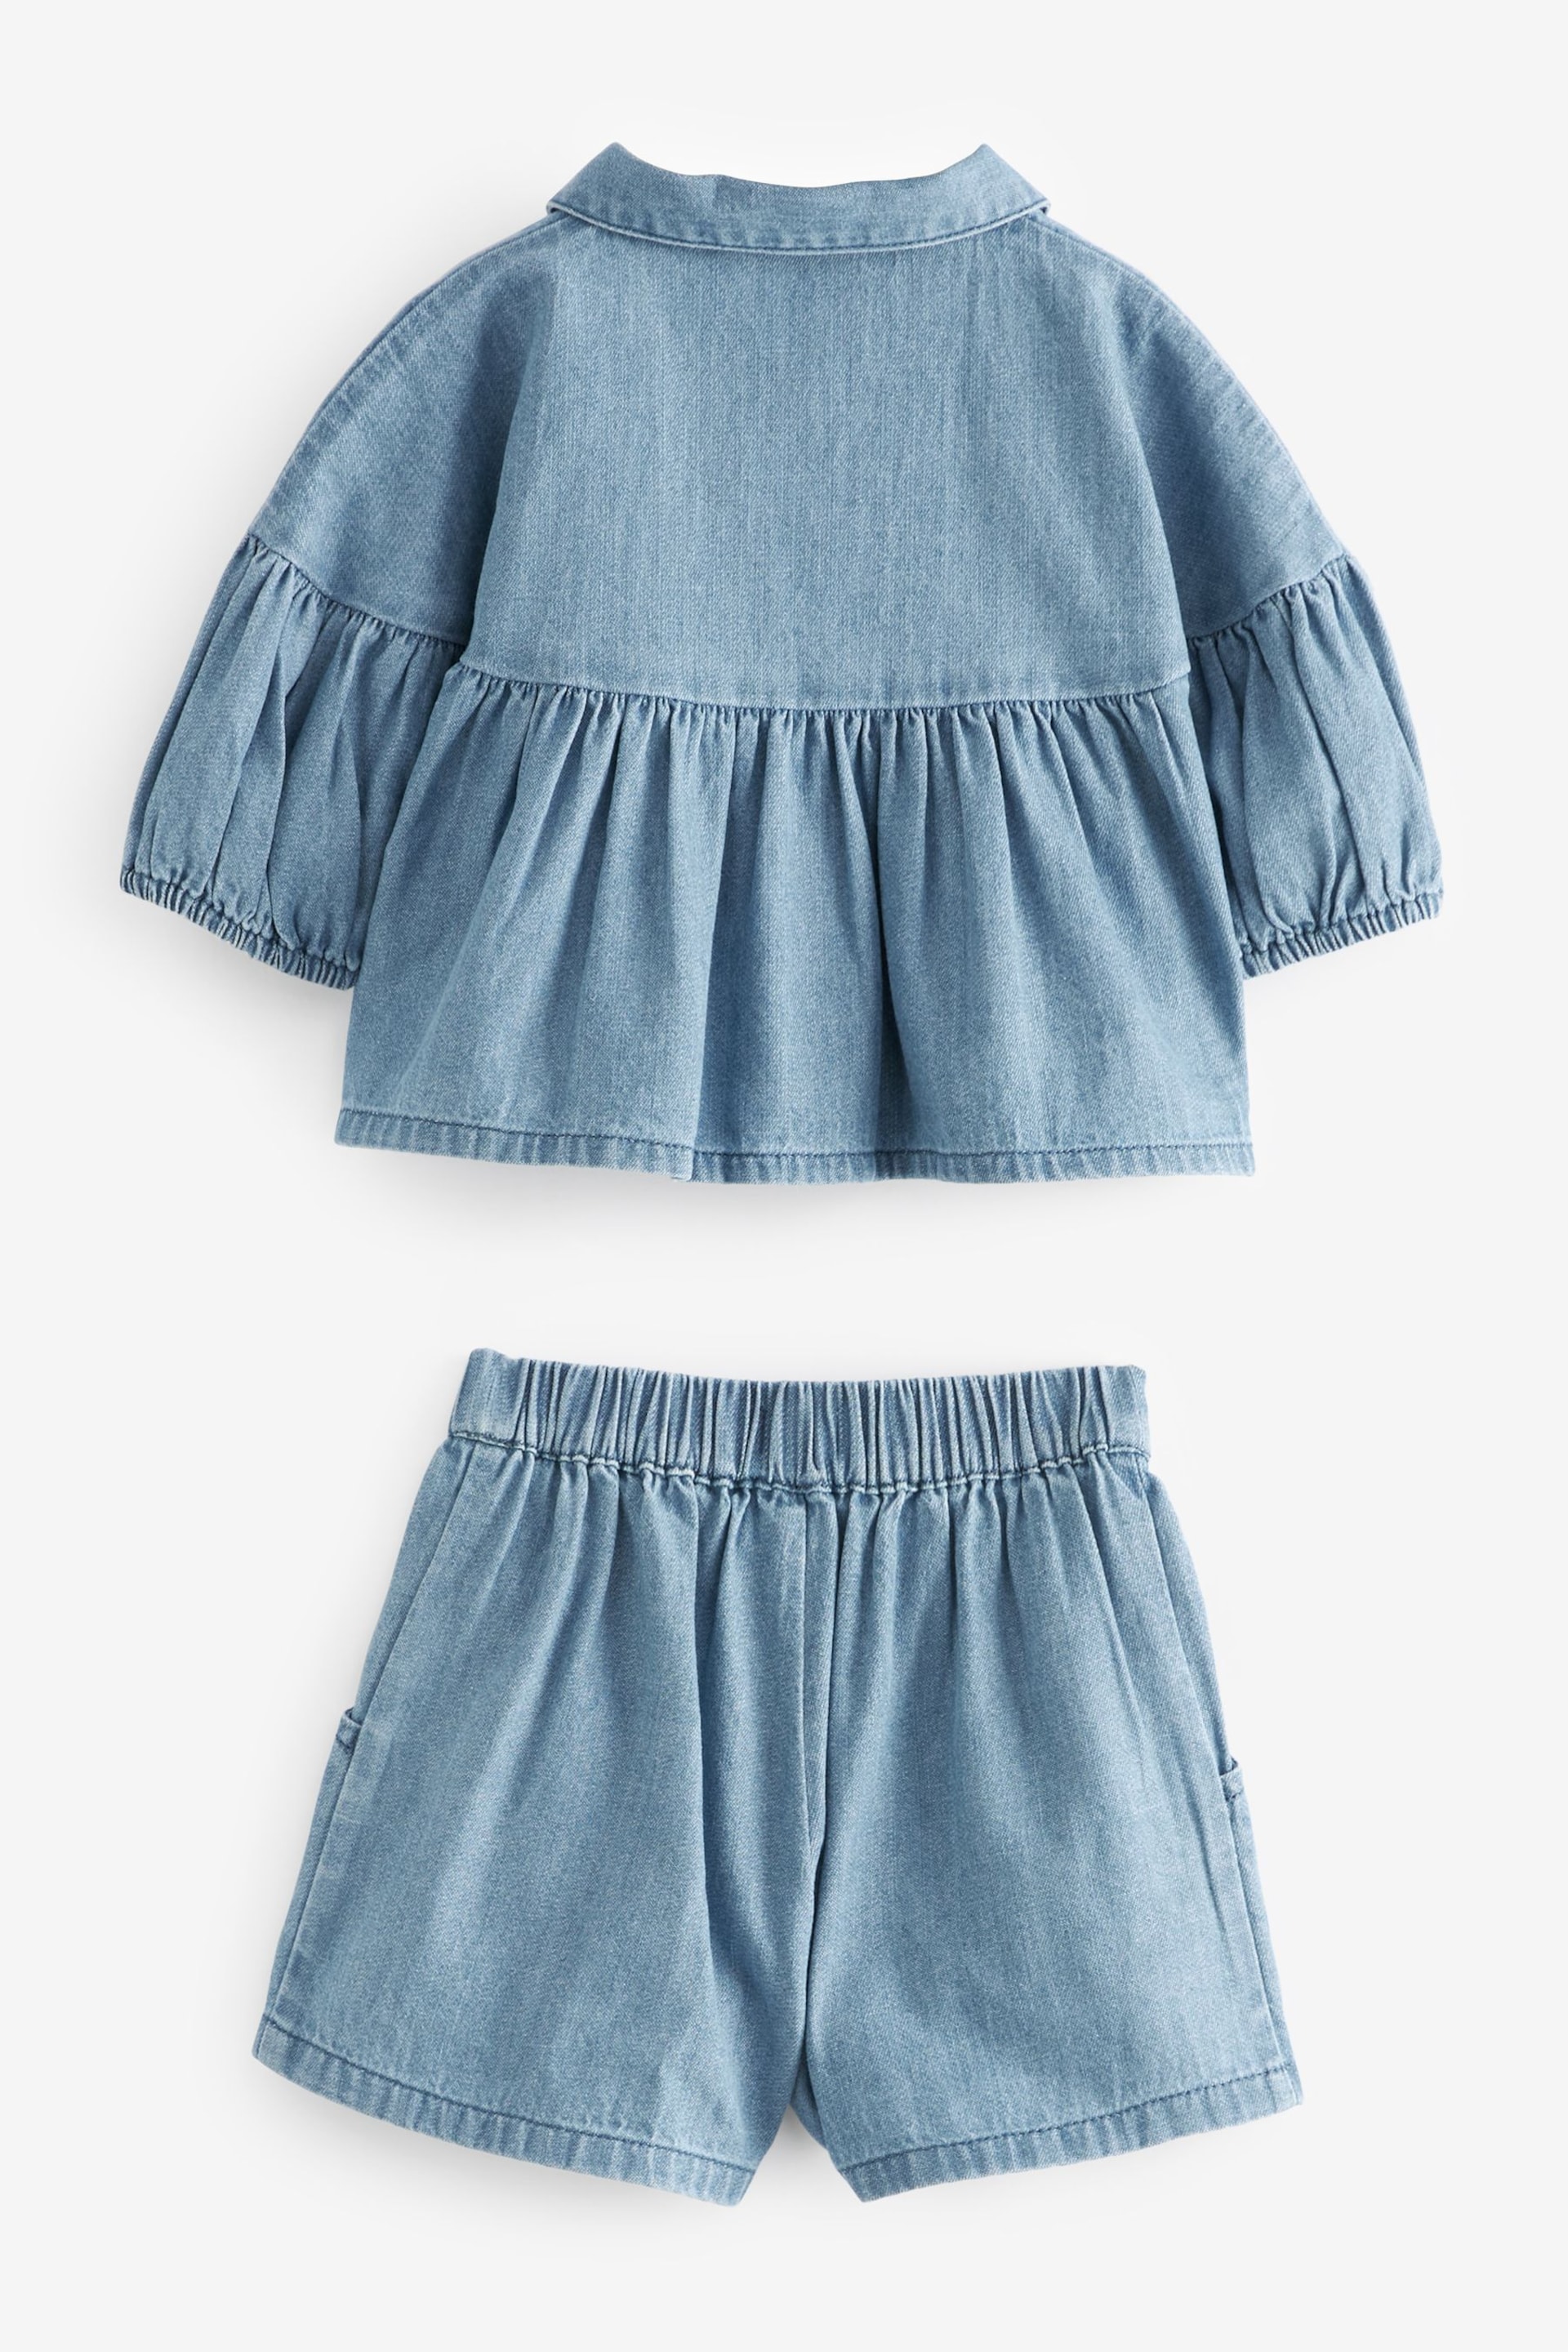 Blue Denim Blouse And Shorts Co-ord Set (3mths-8yrs) - Image 5 of 7